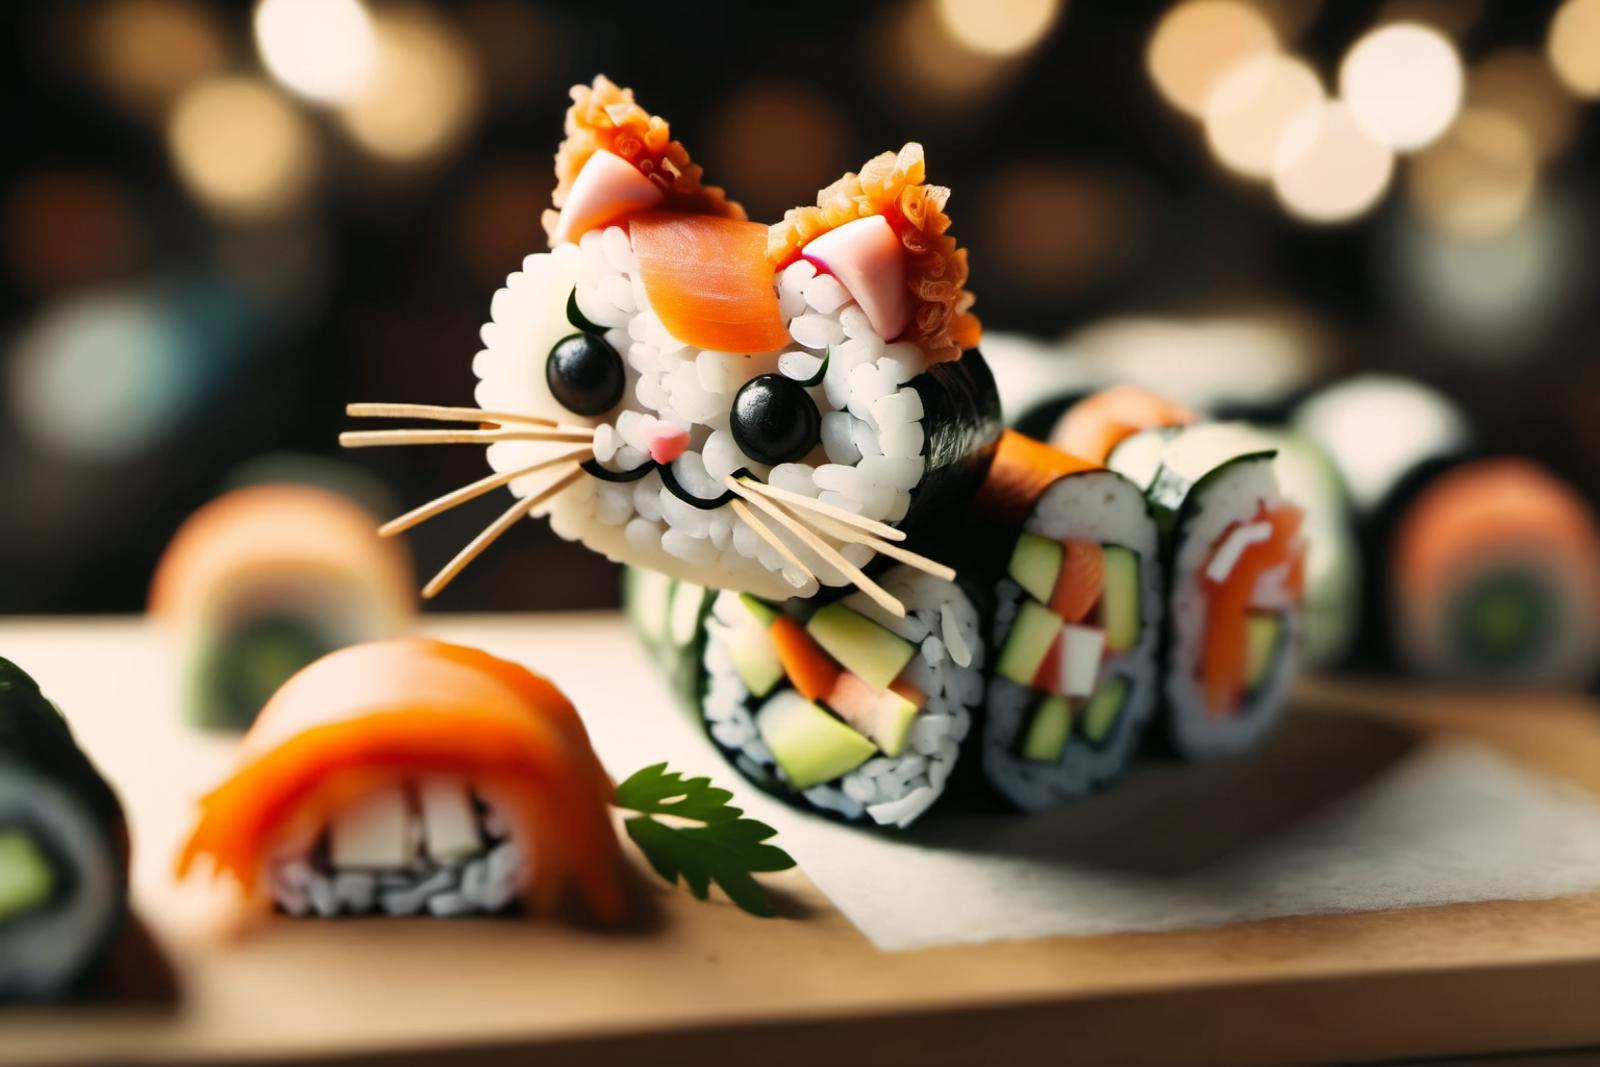 A cute cat-shaped sushi roll made with sliced salmon and cucumber.